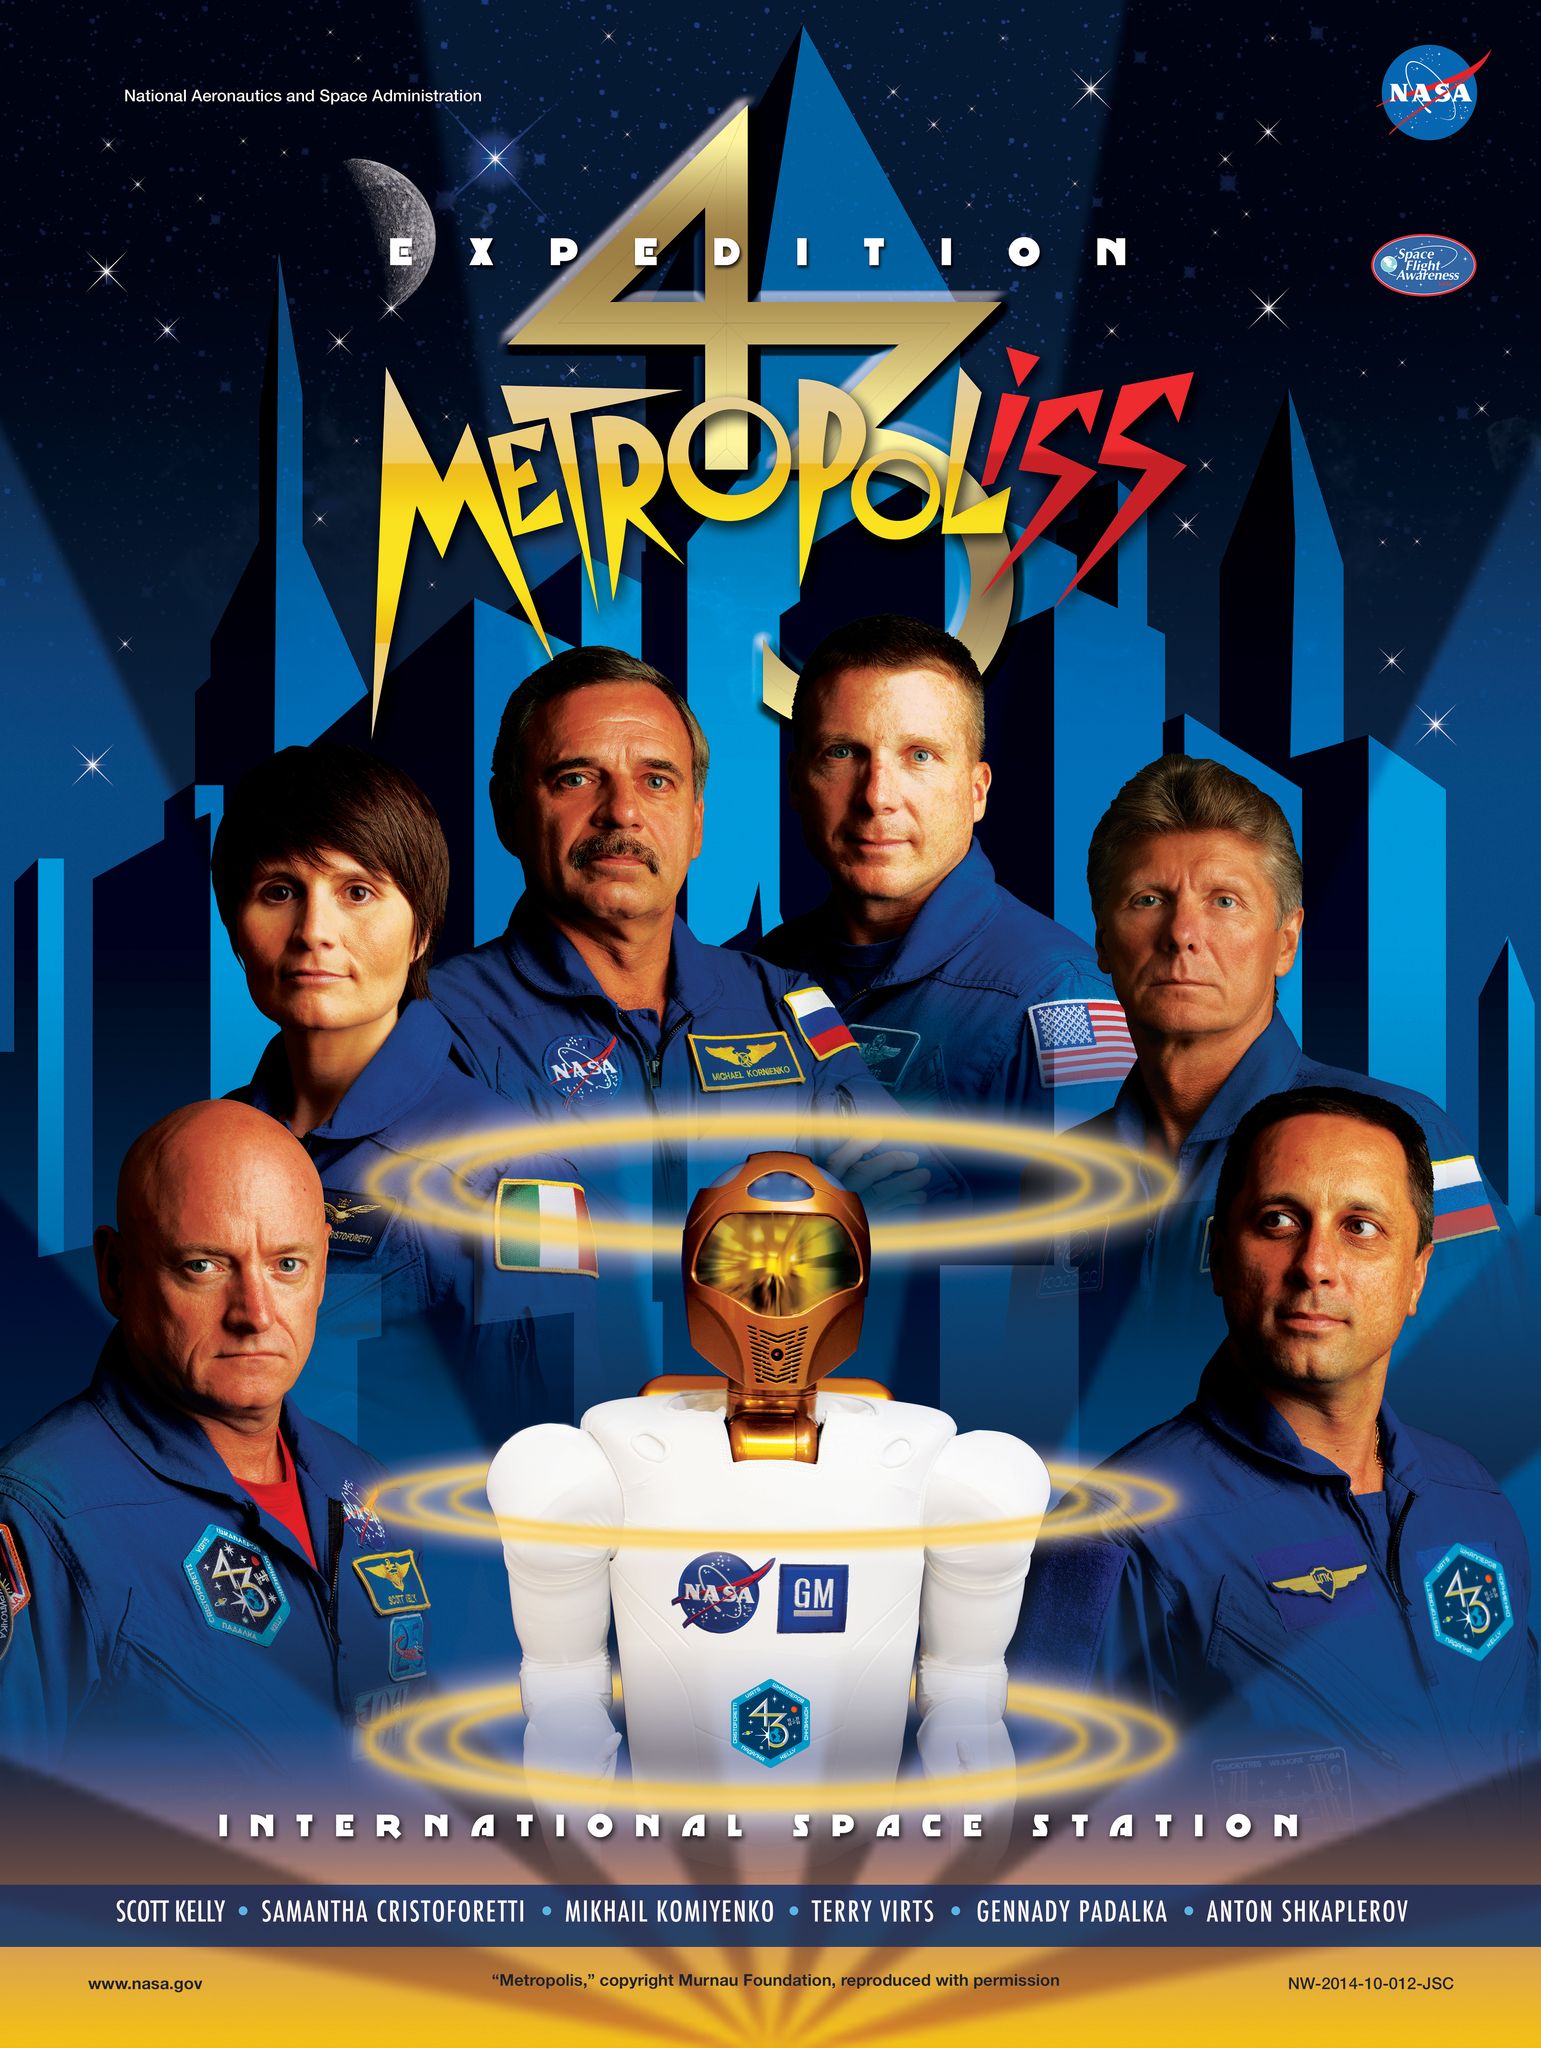 Expedition_43_'METROPOLISS'_crew_poster